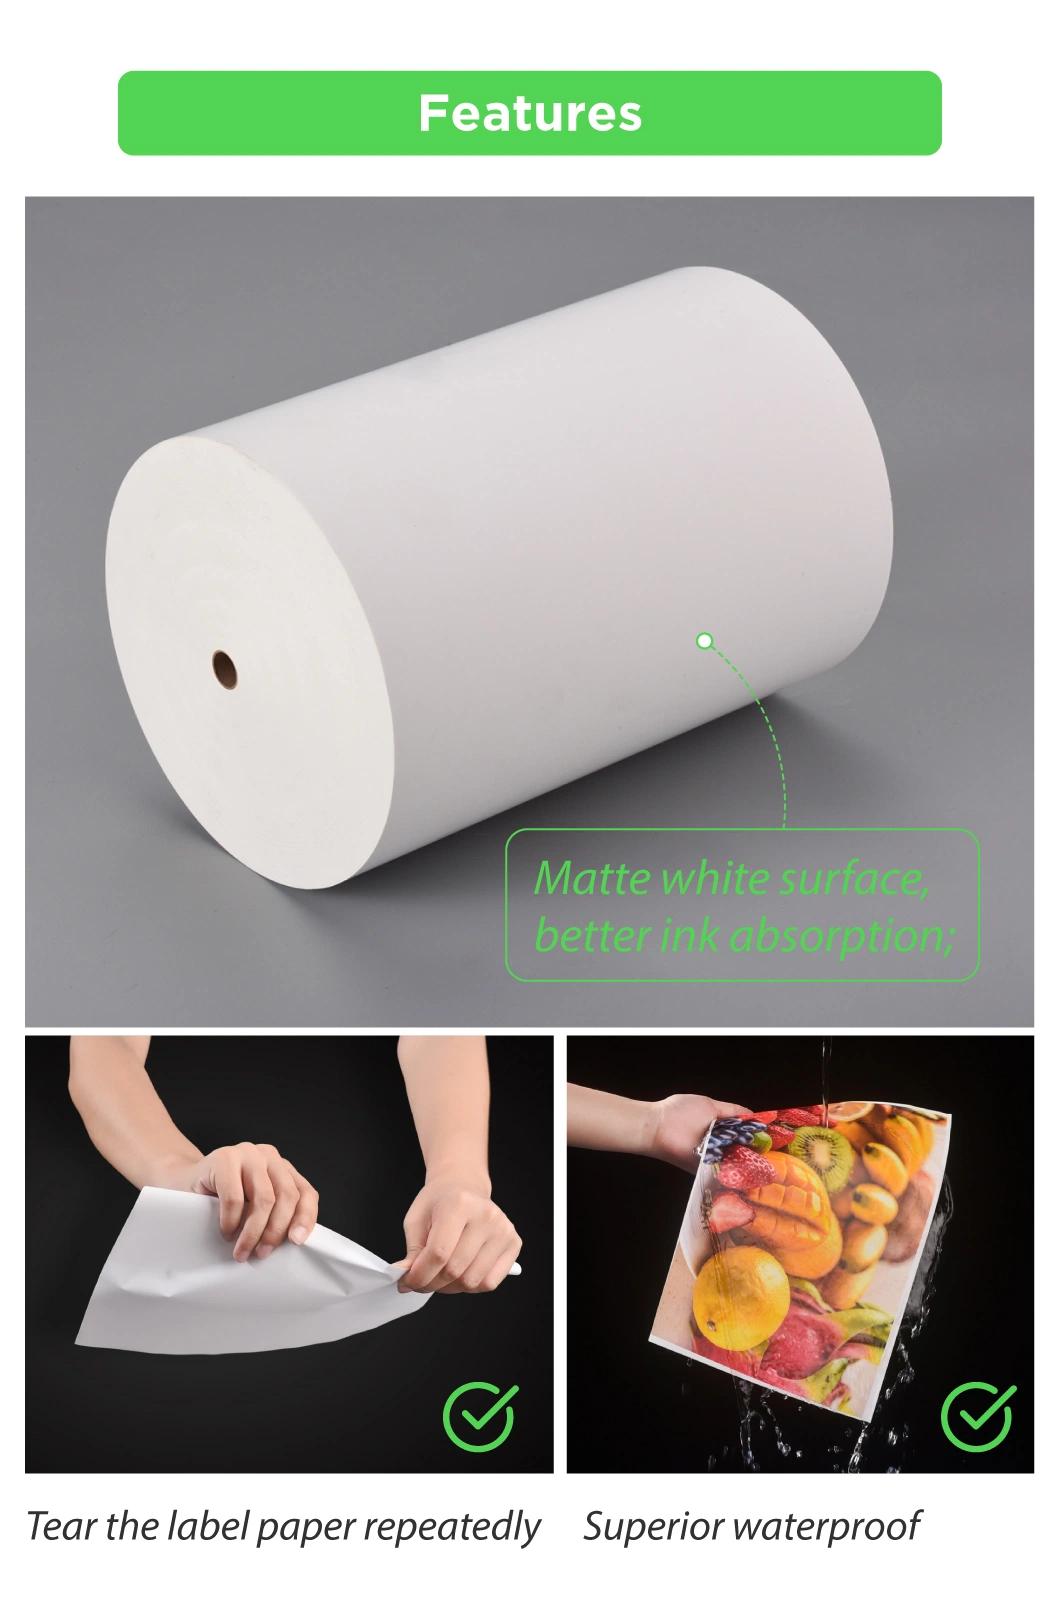 Flexographic Printing various consumer products Rightint Carton sticker flexography label